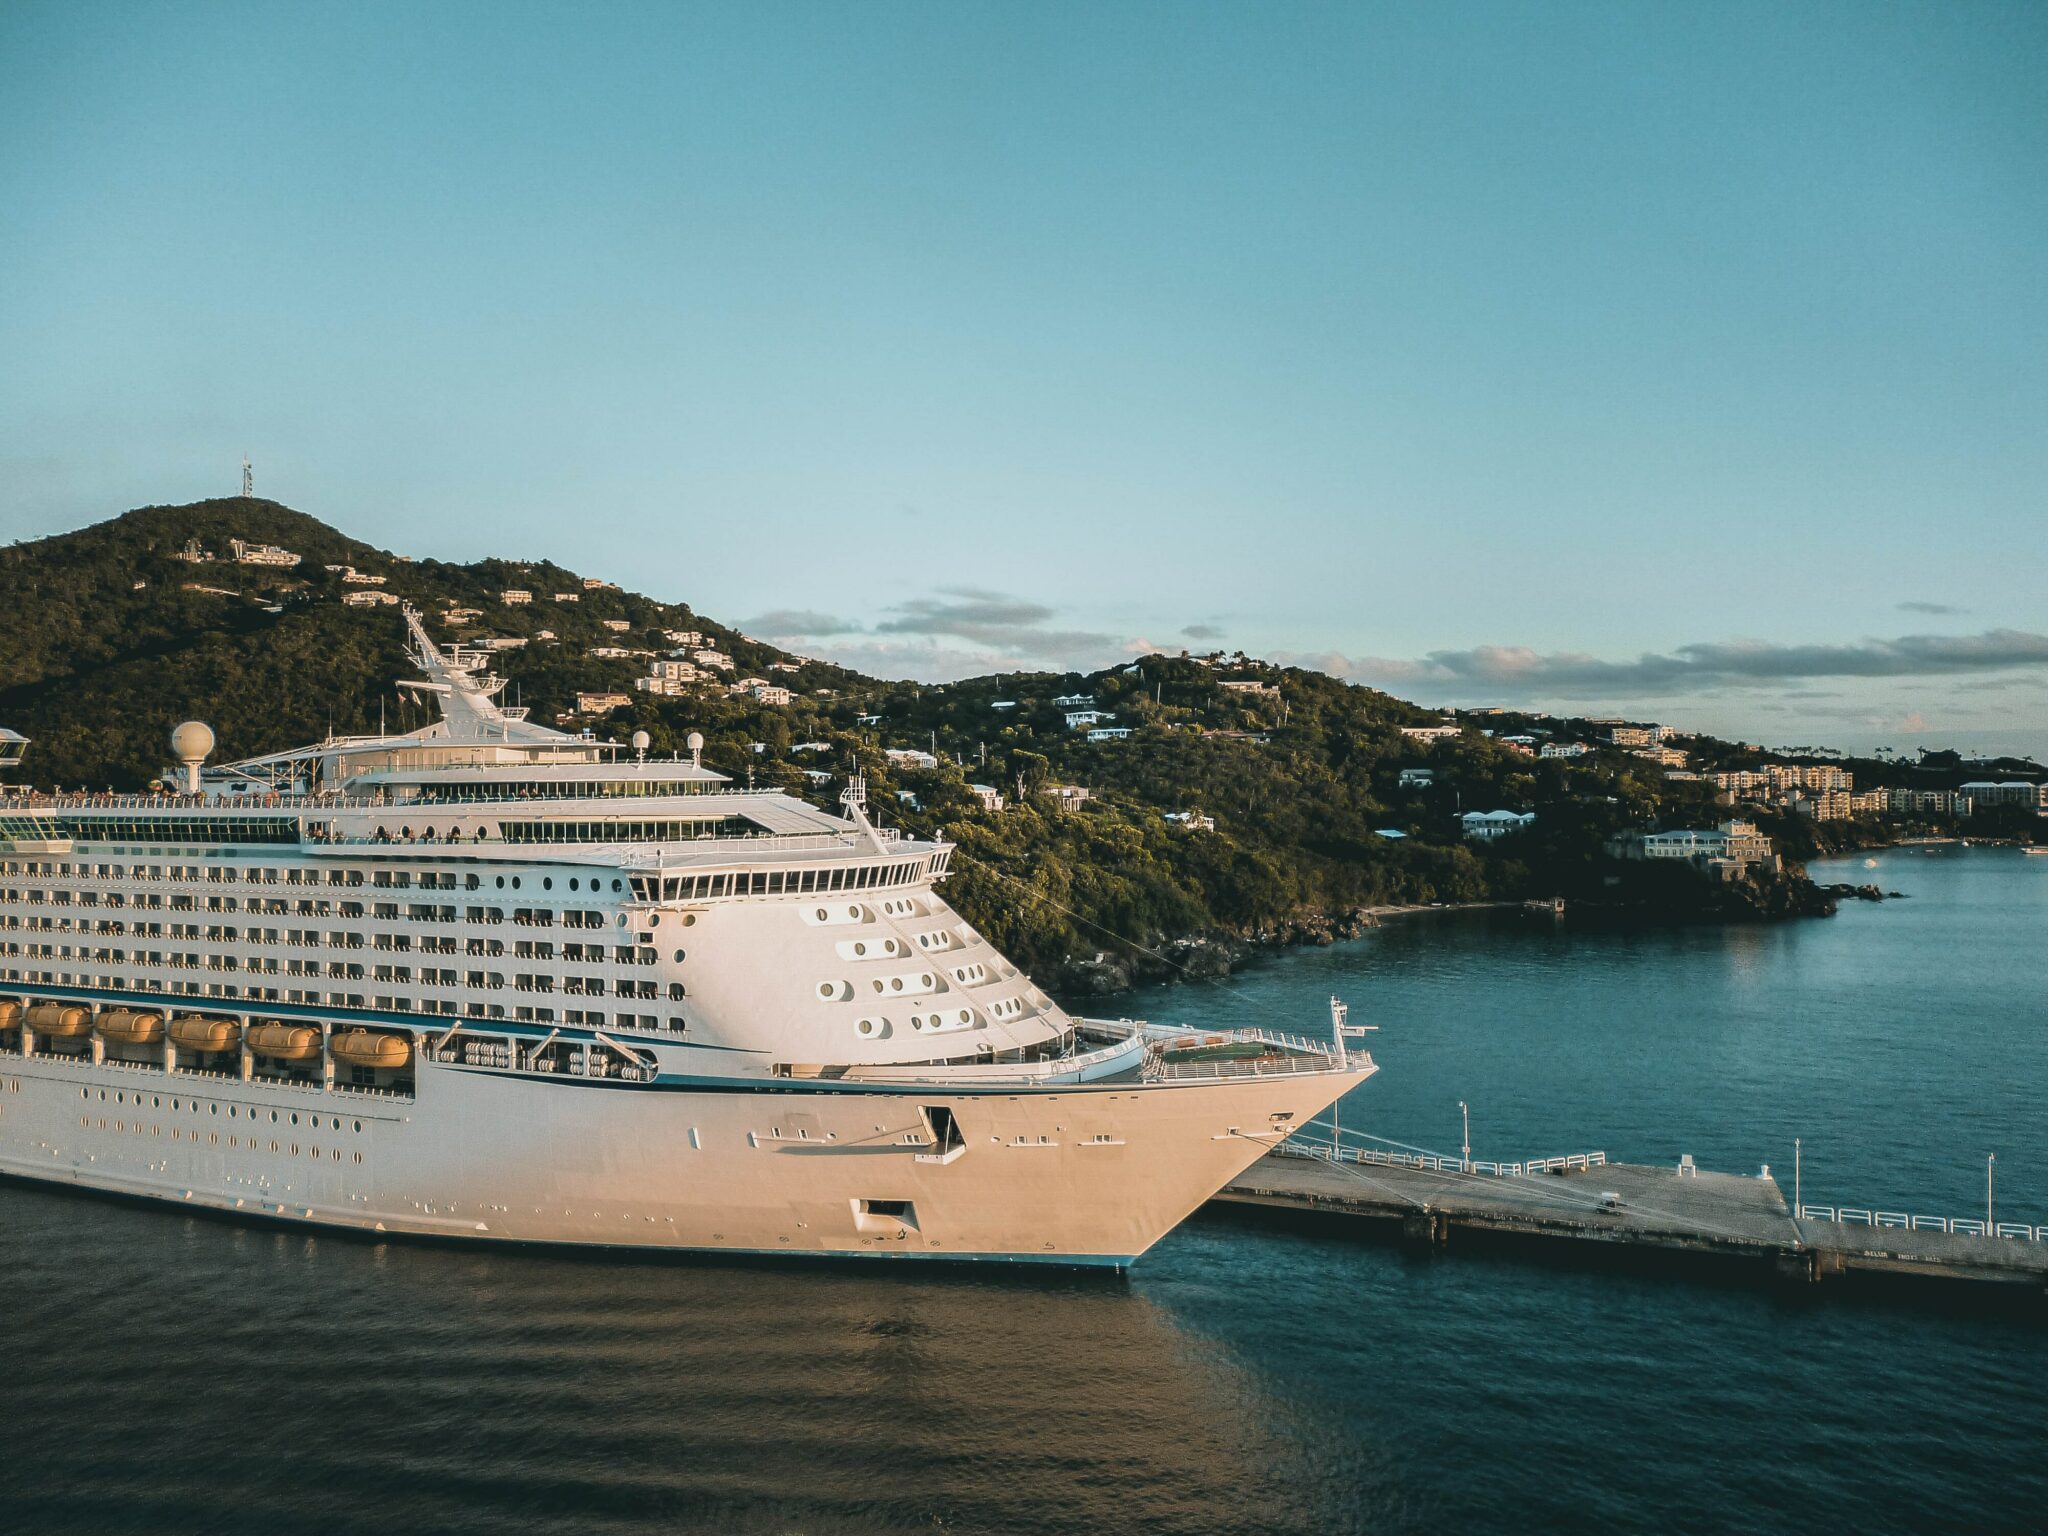 Malta: Total Cruise Passenger Traffic During The Second Quarter Of 2021 Amounted To 23,437